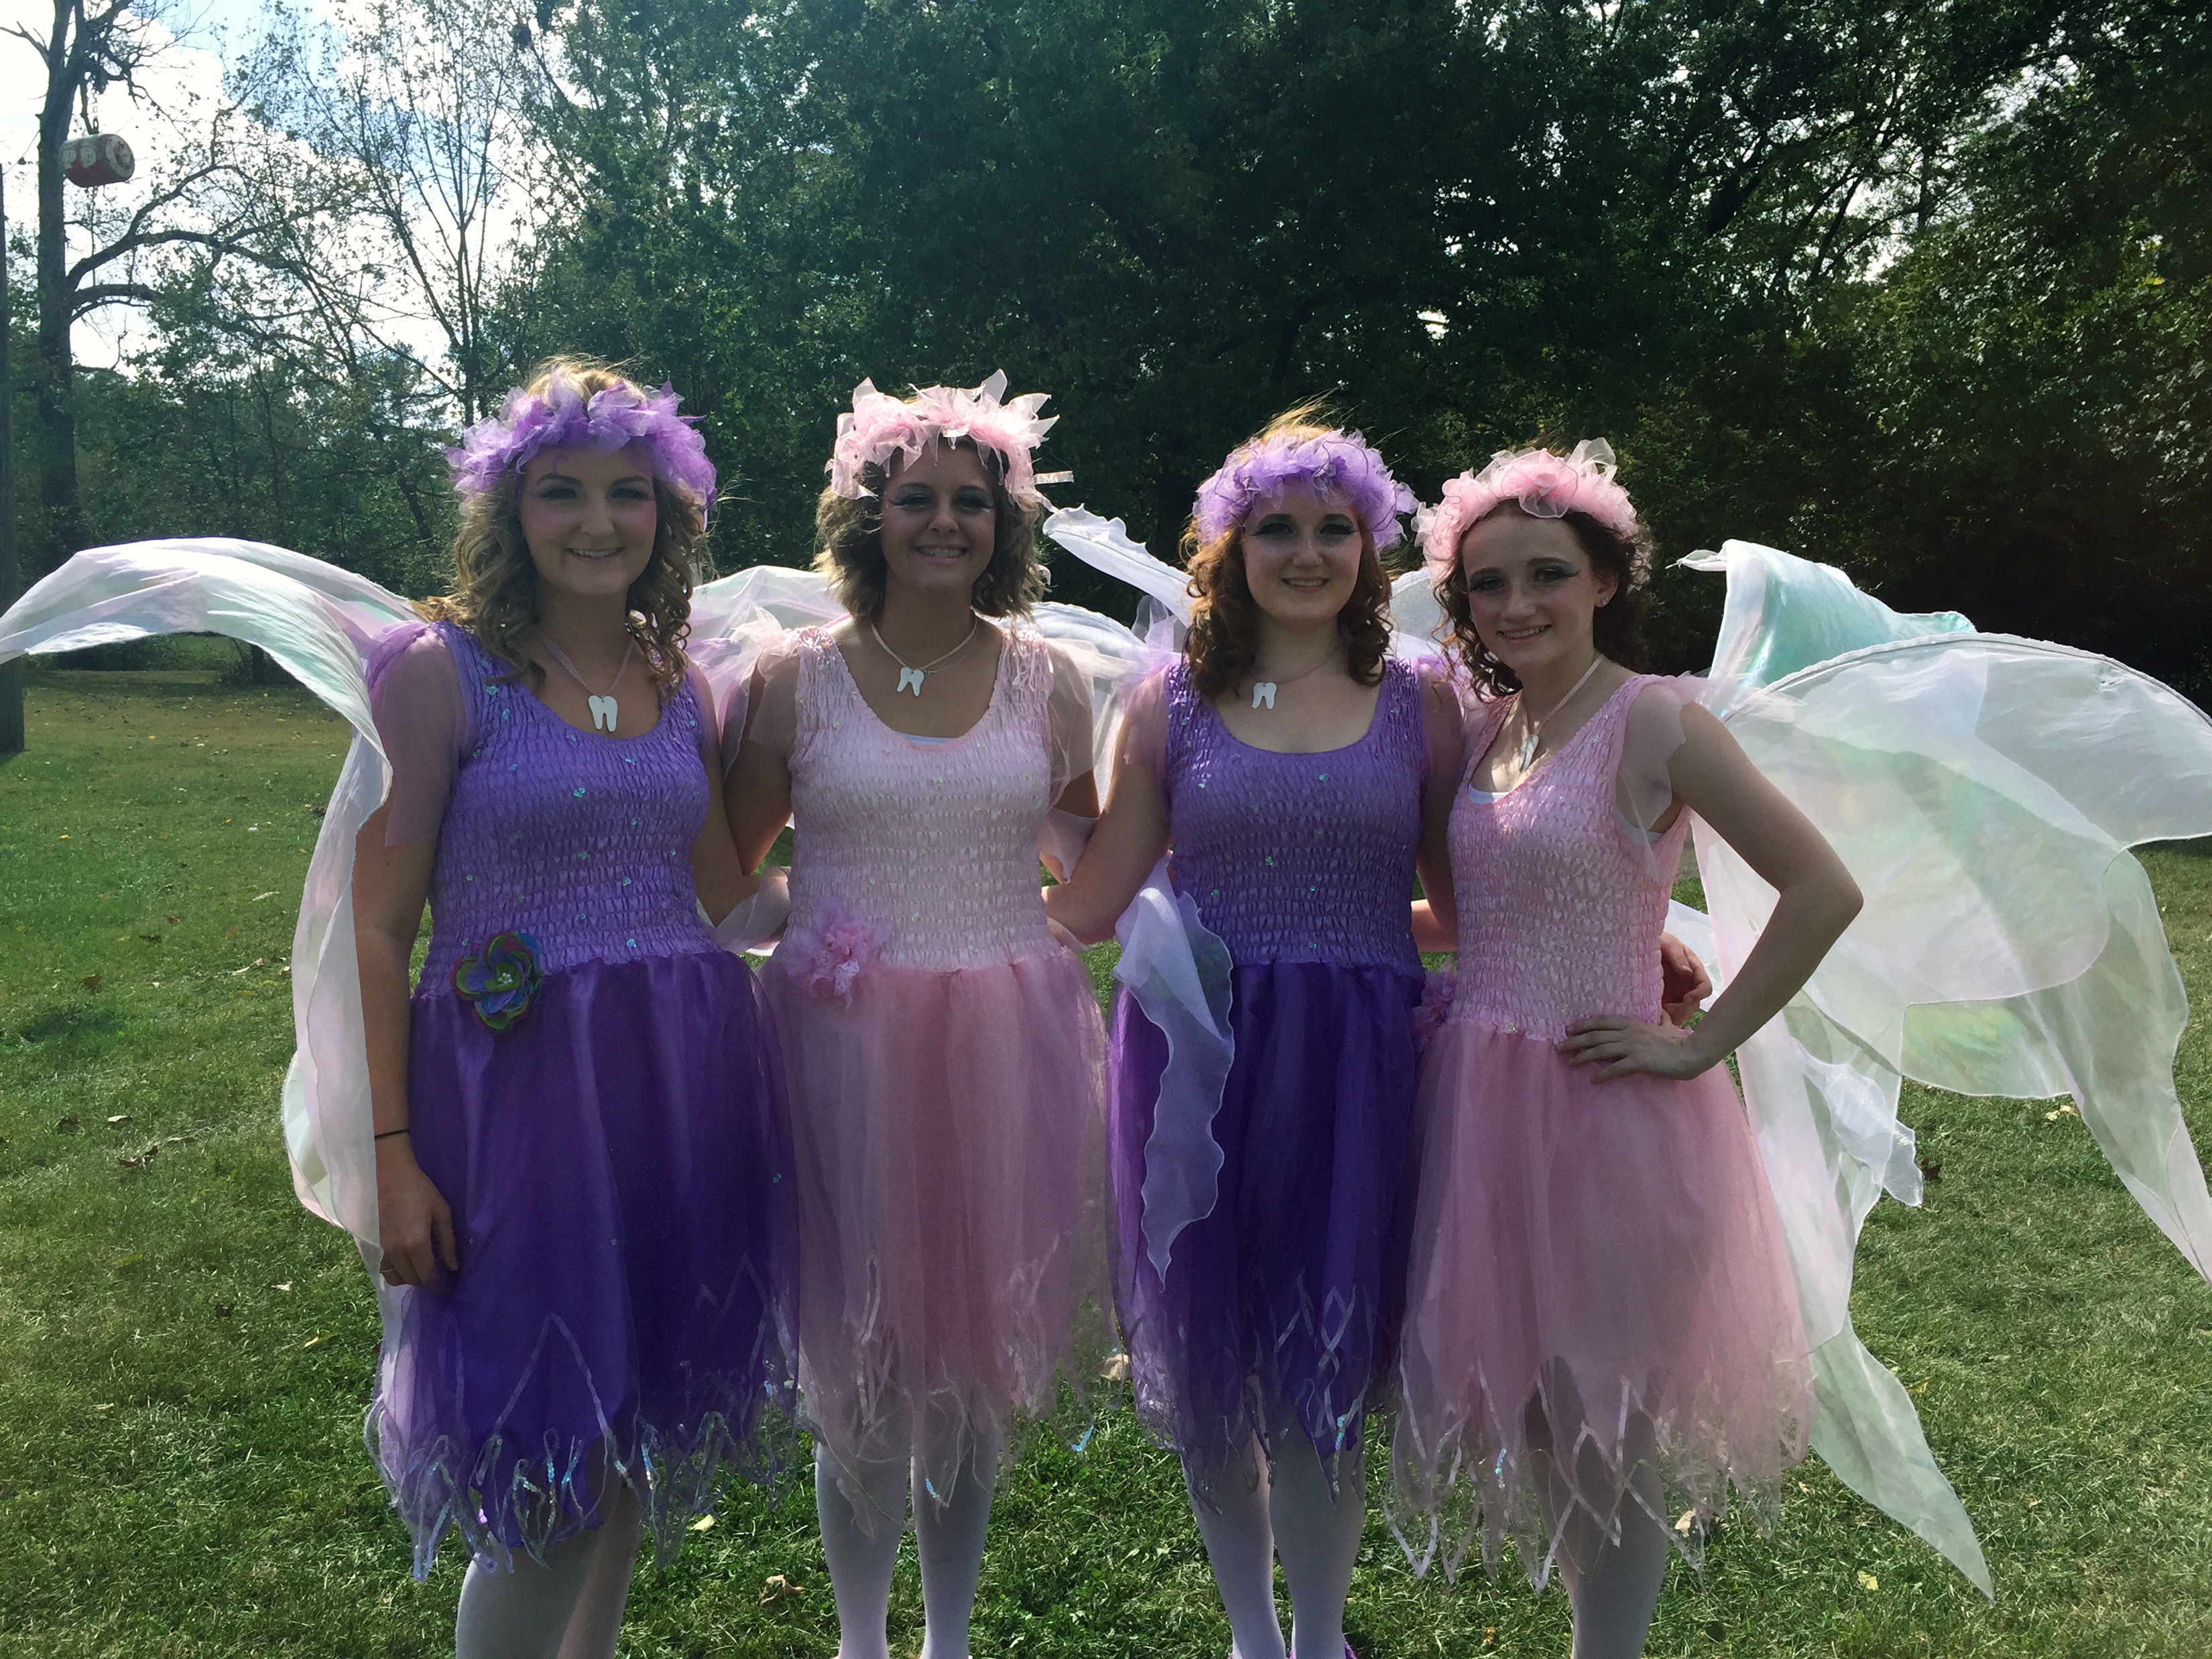 Dental Assisting students dressed as tooth fairies.